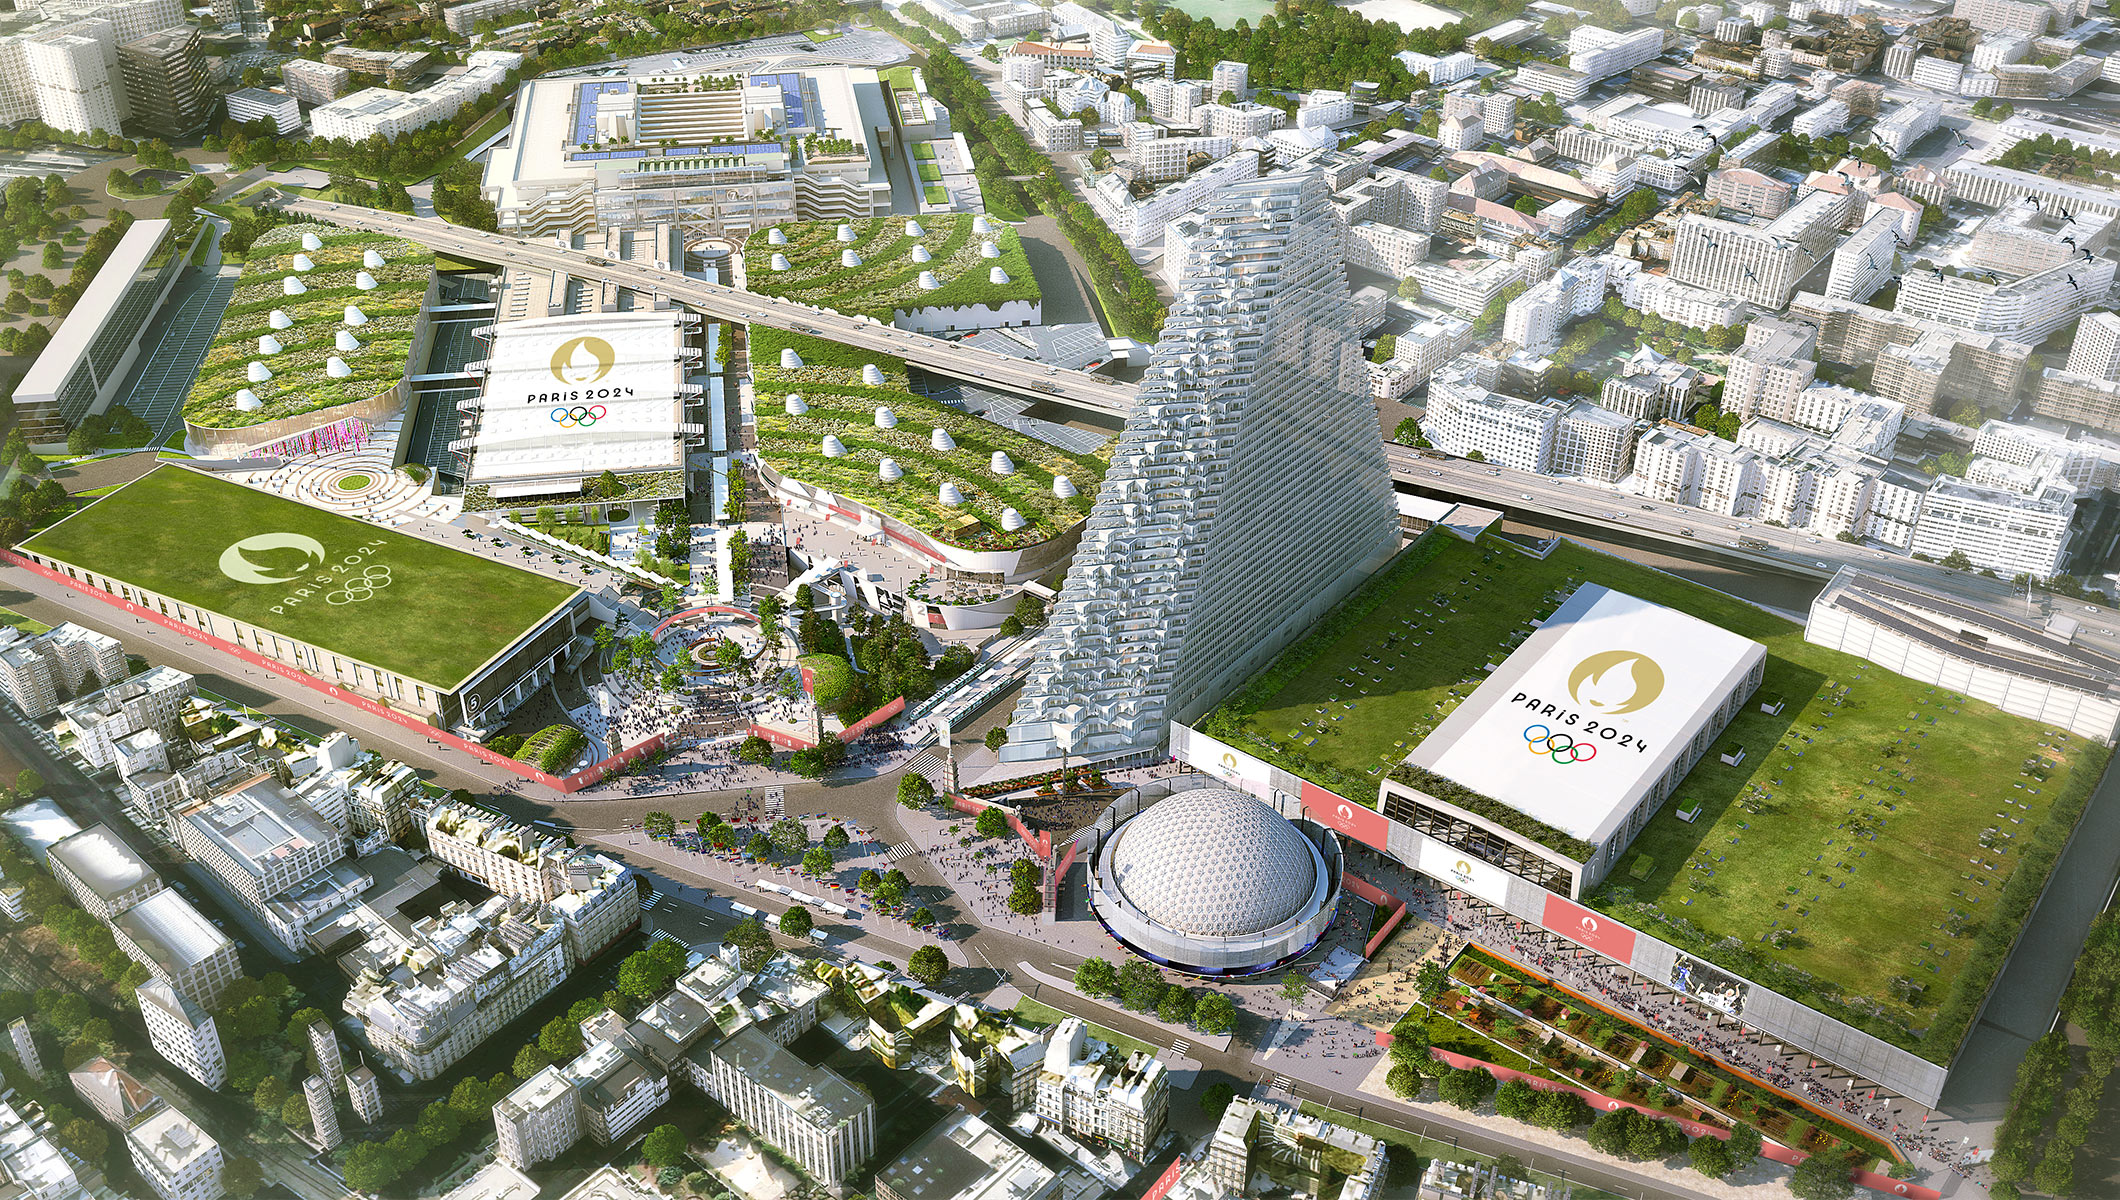 New era of Games embraced as updated Paris 2024 venue concept approved